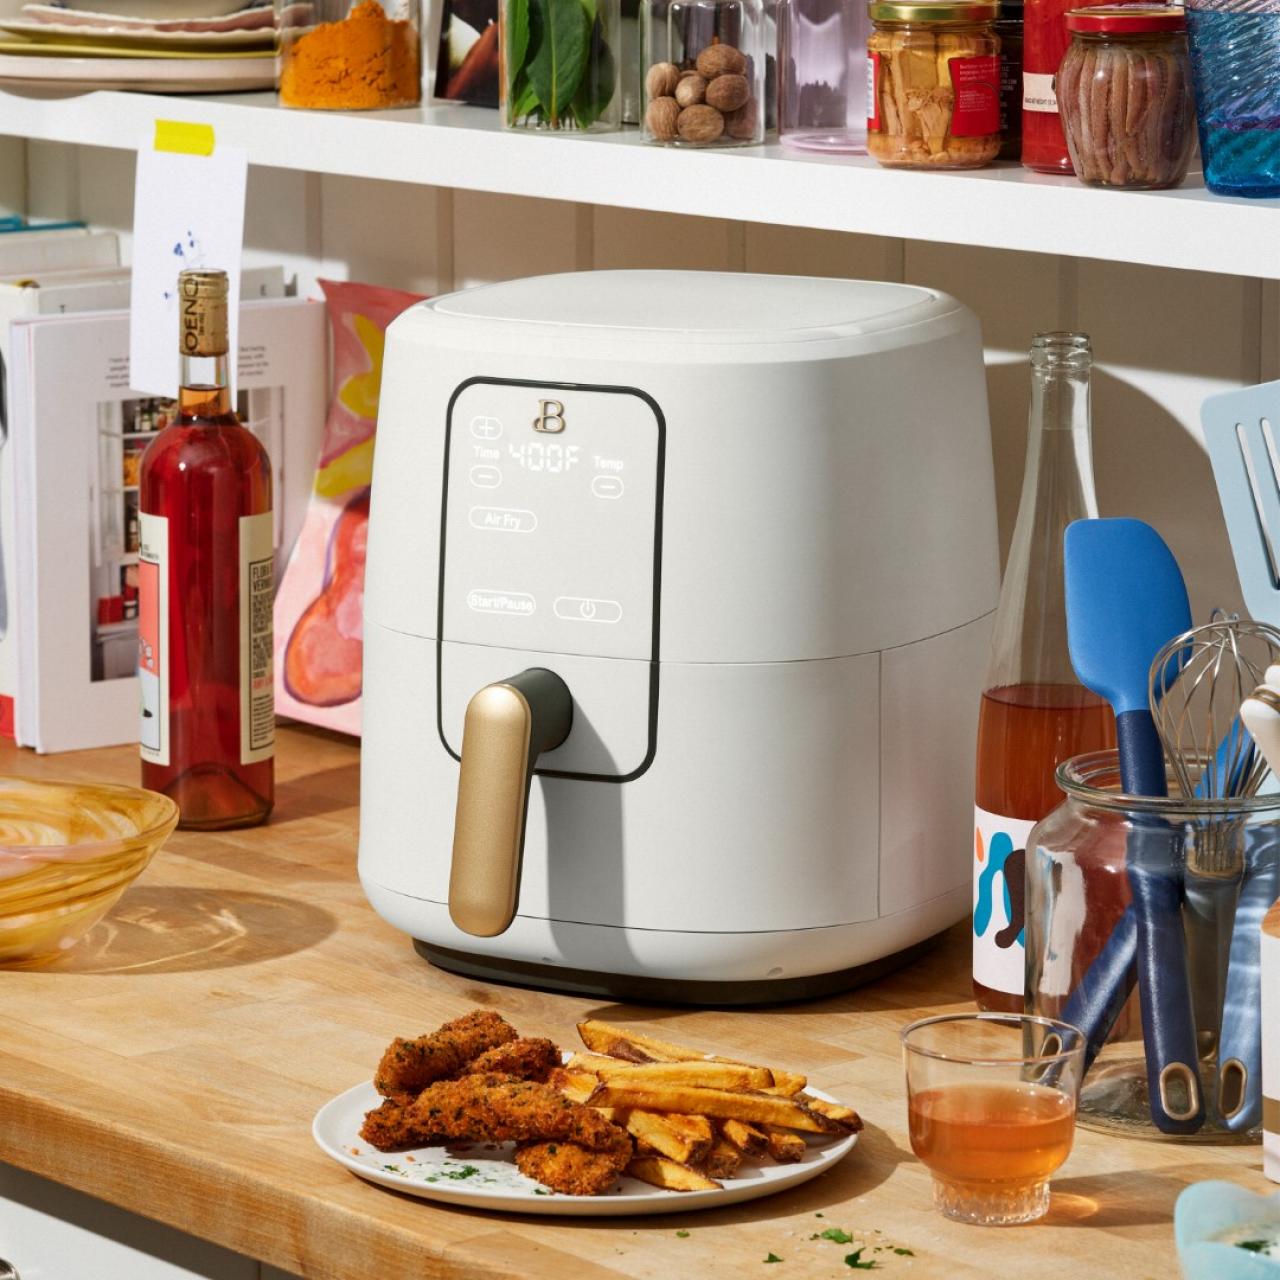 The 50 Best  Kitchen Deals To Shop During Black Friday 2023